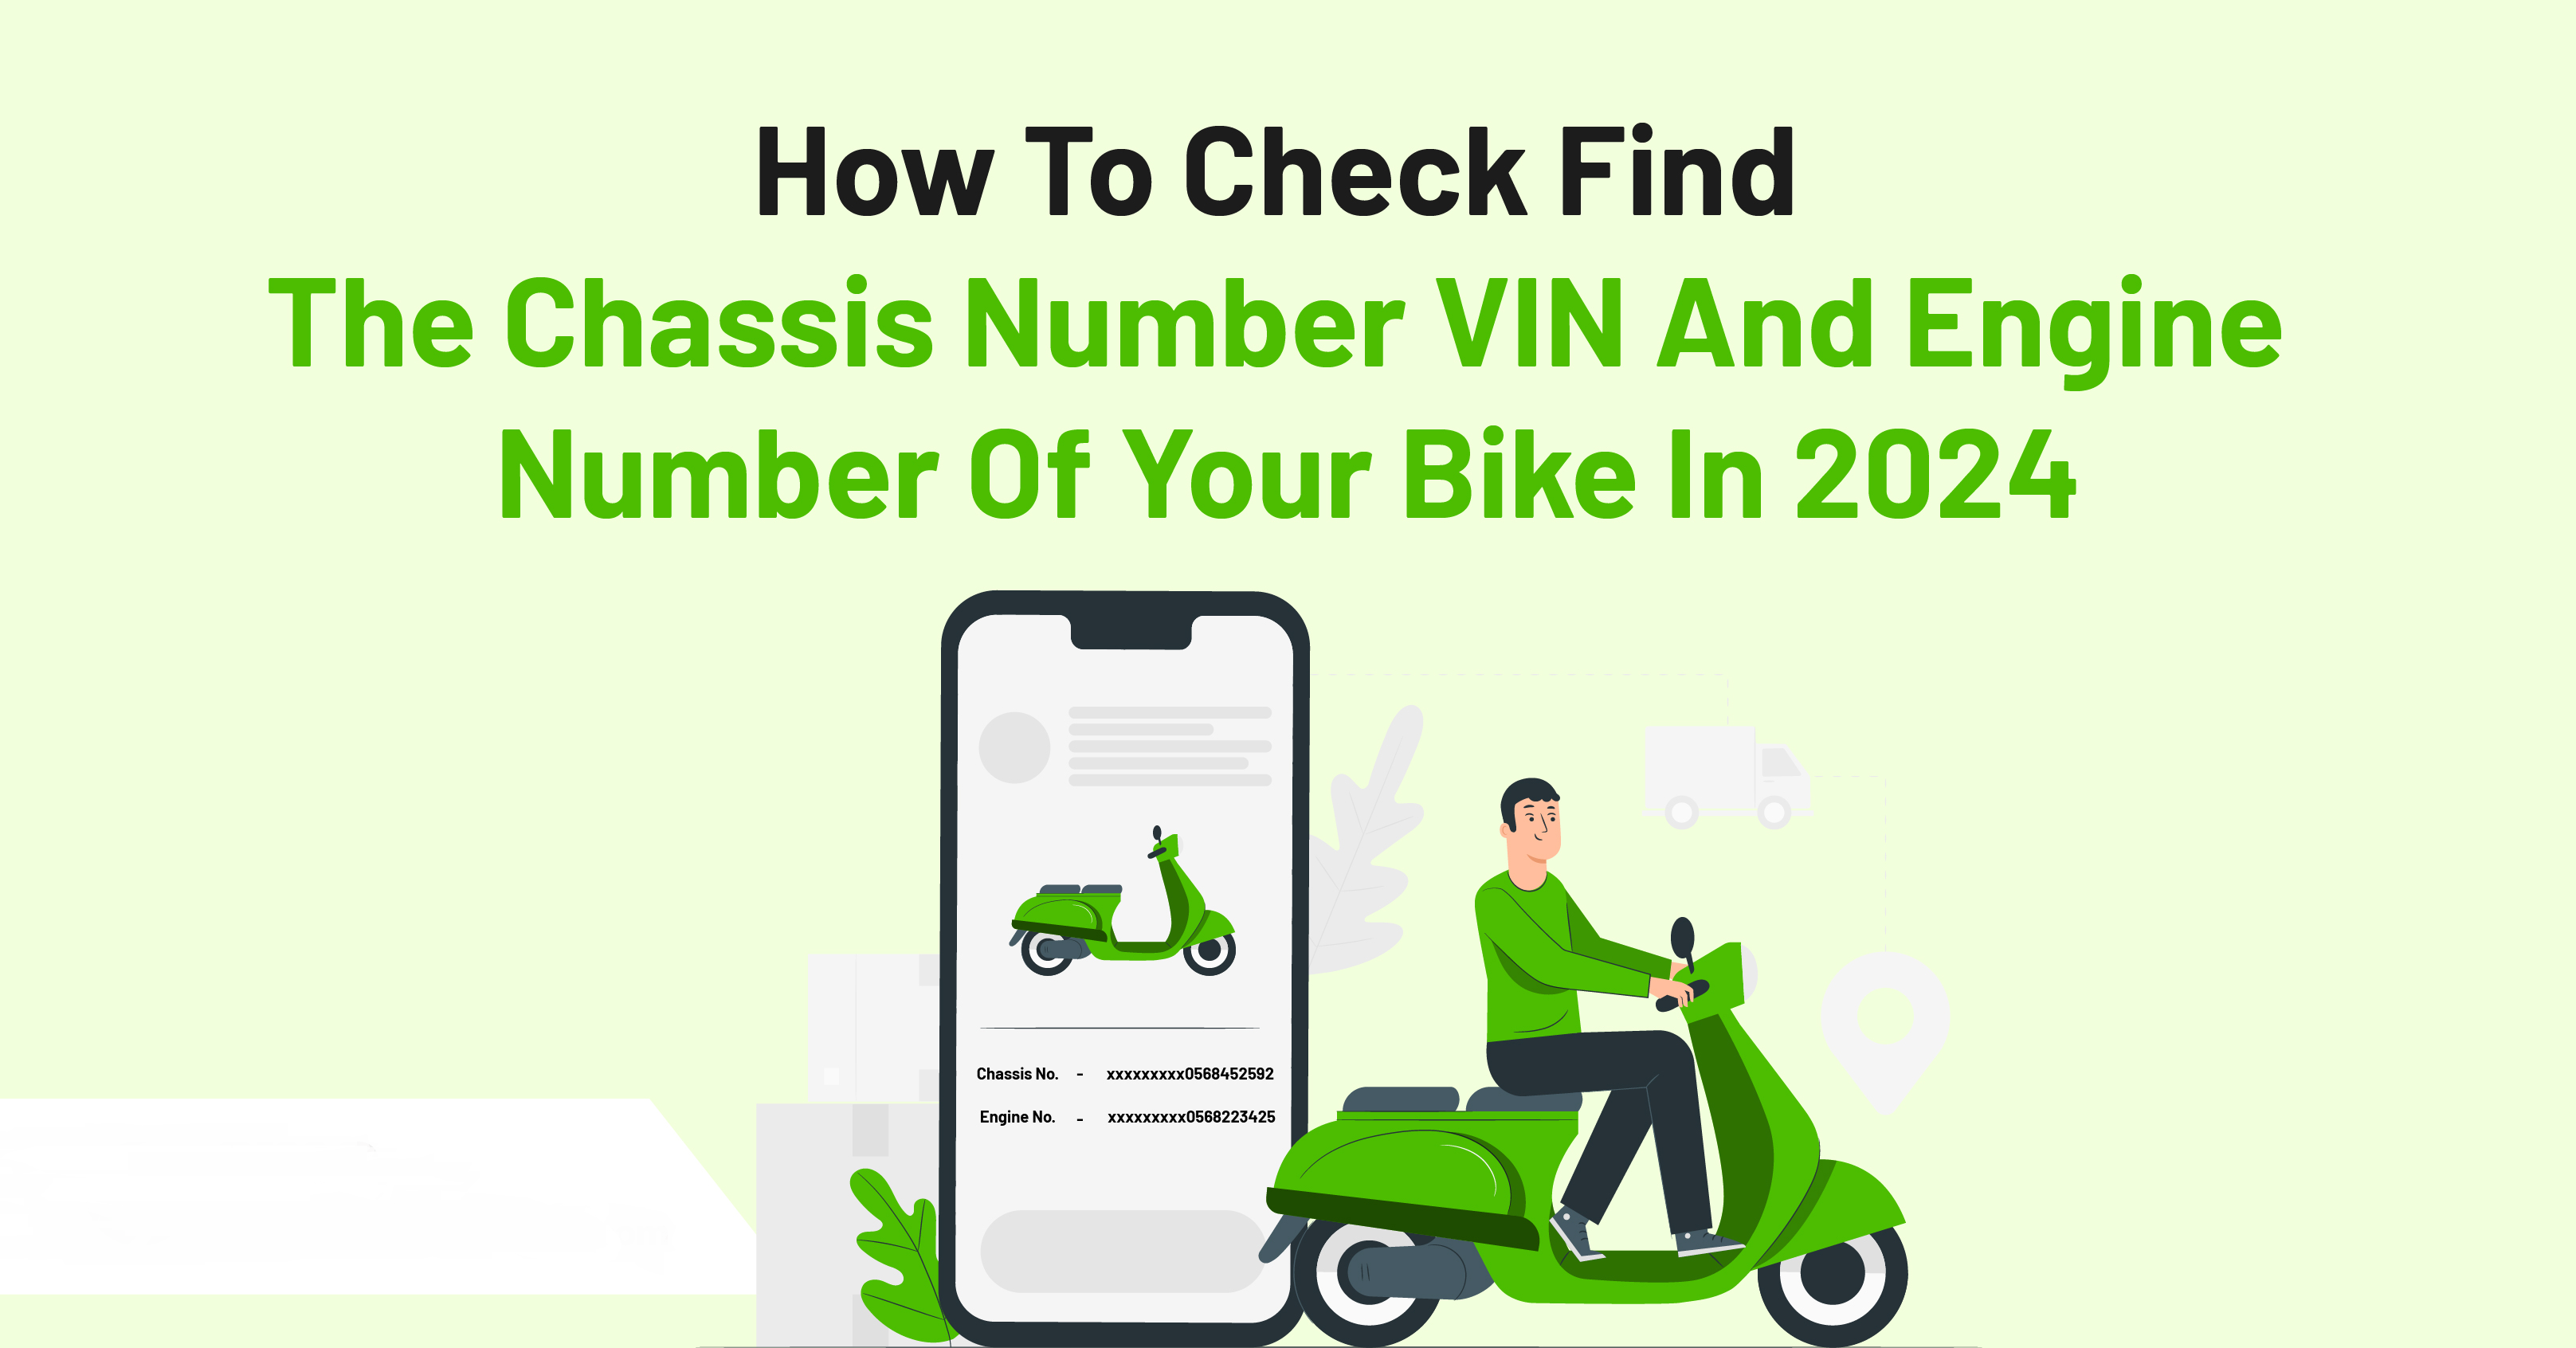 How To Check/Find The Chassis Number, VIN And Engine Number Of Your Bike Image